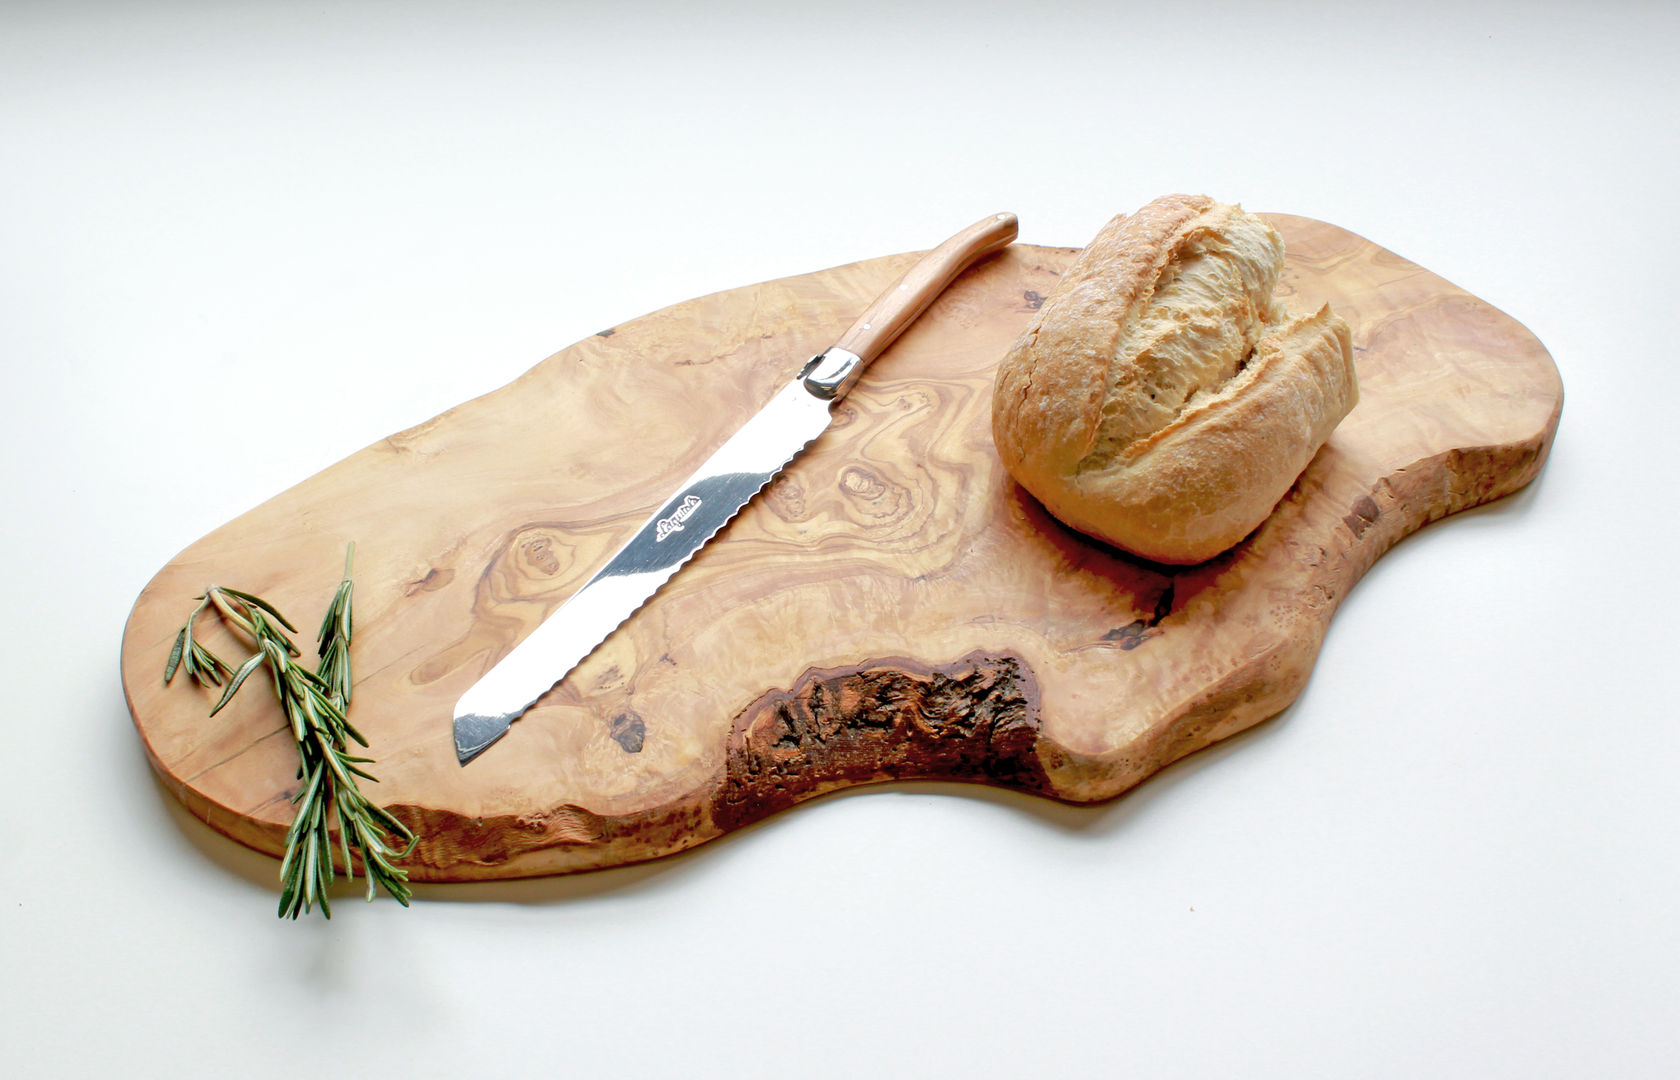 Large Rustic Olive Wood Serving Board, The Rustic Dish The Rustic Dish Rustic style kitchen Kitchen utensils